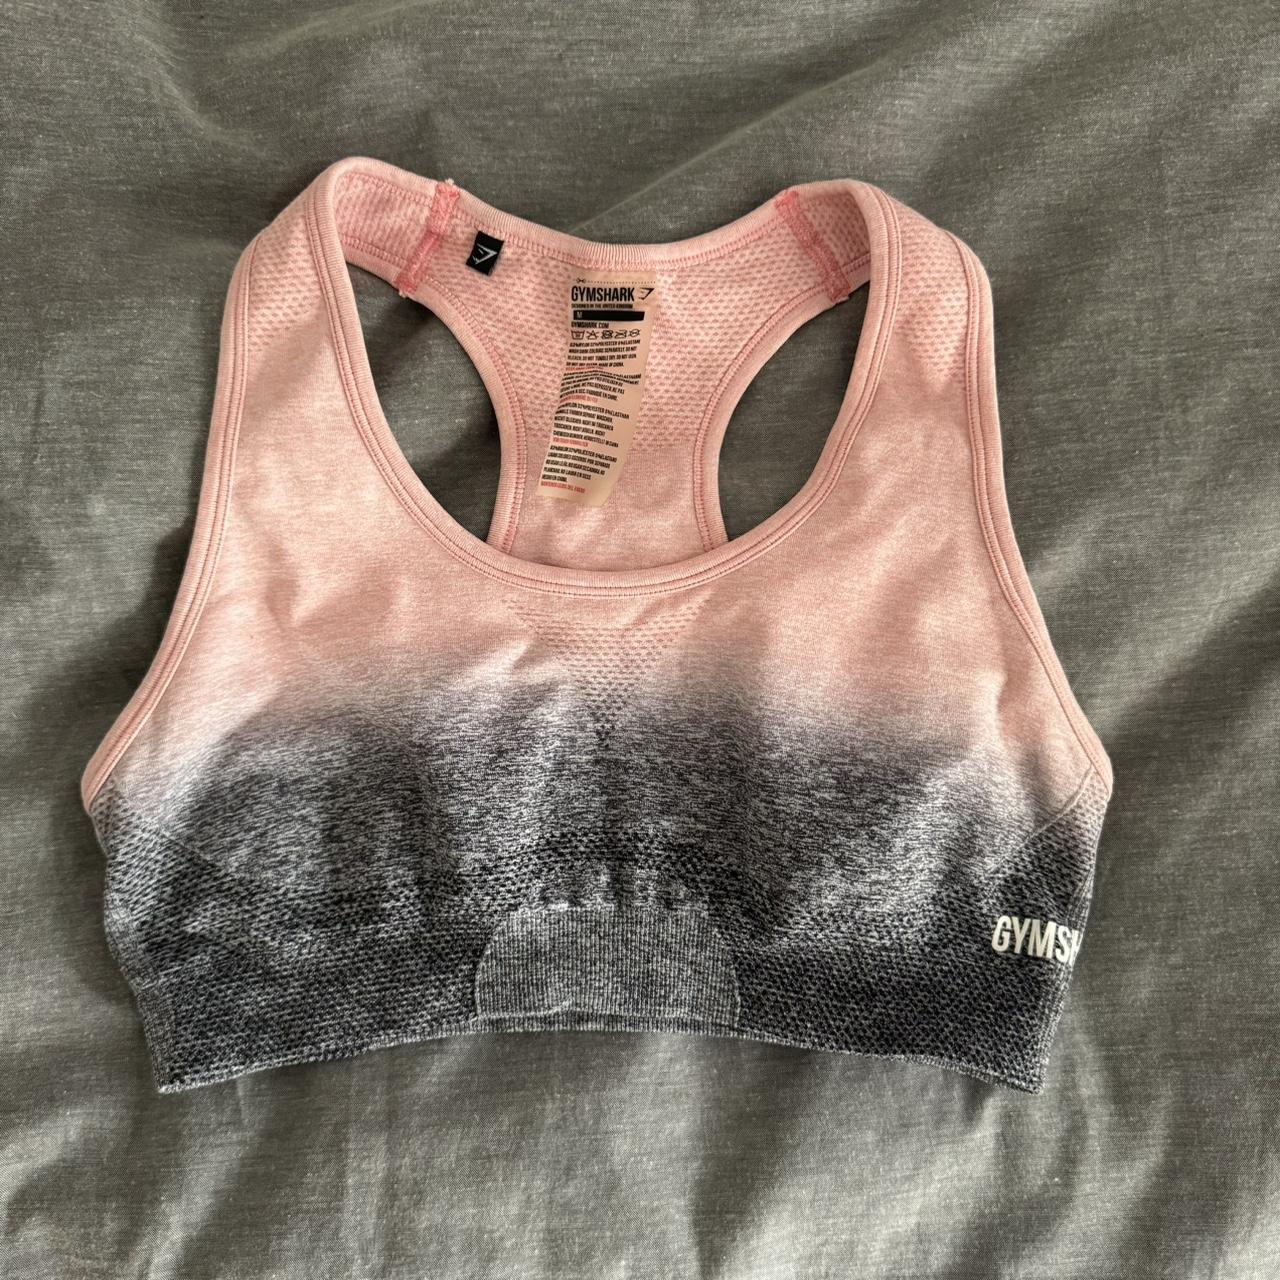 GYMSHARK SPORTS BRA - doesn’t come with padding -... - Depop